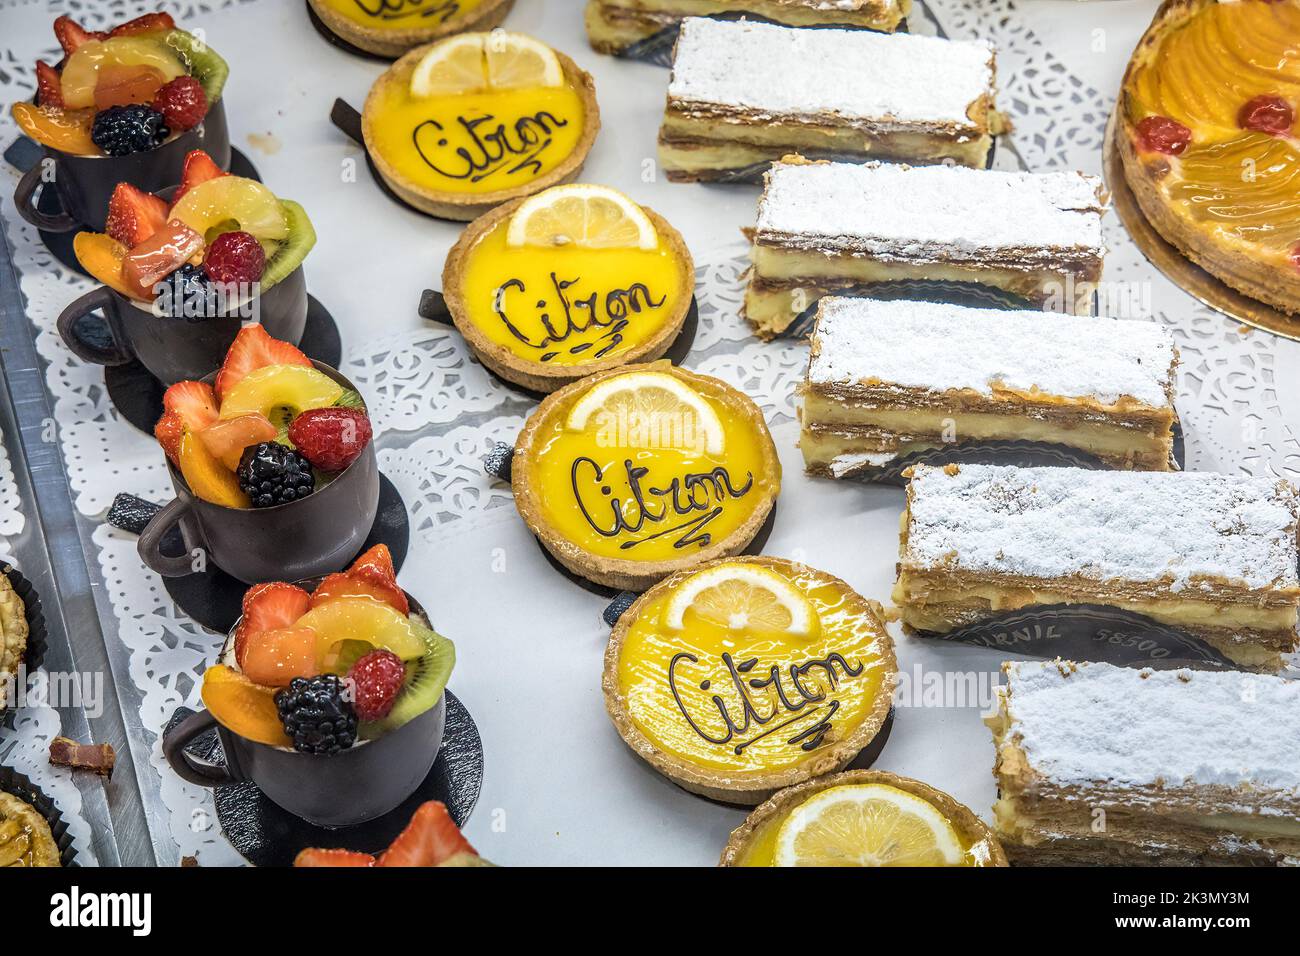 Cakes and pastries on sale in bakery, France Stock Photo